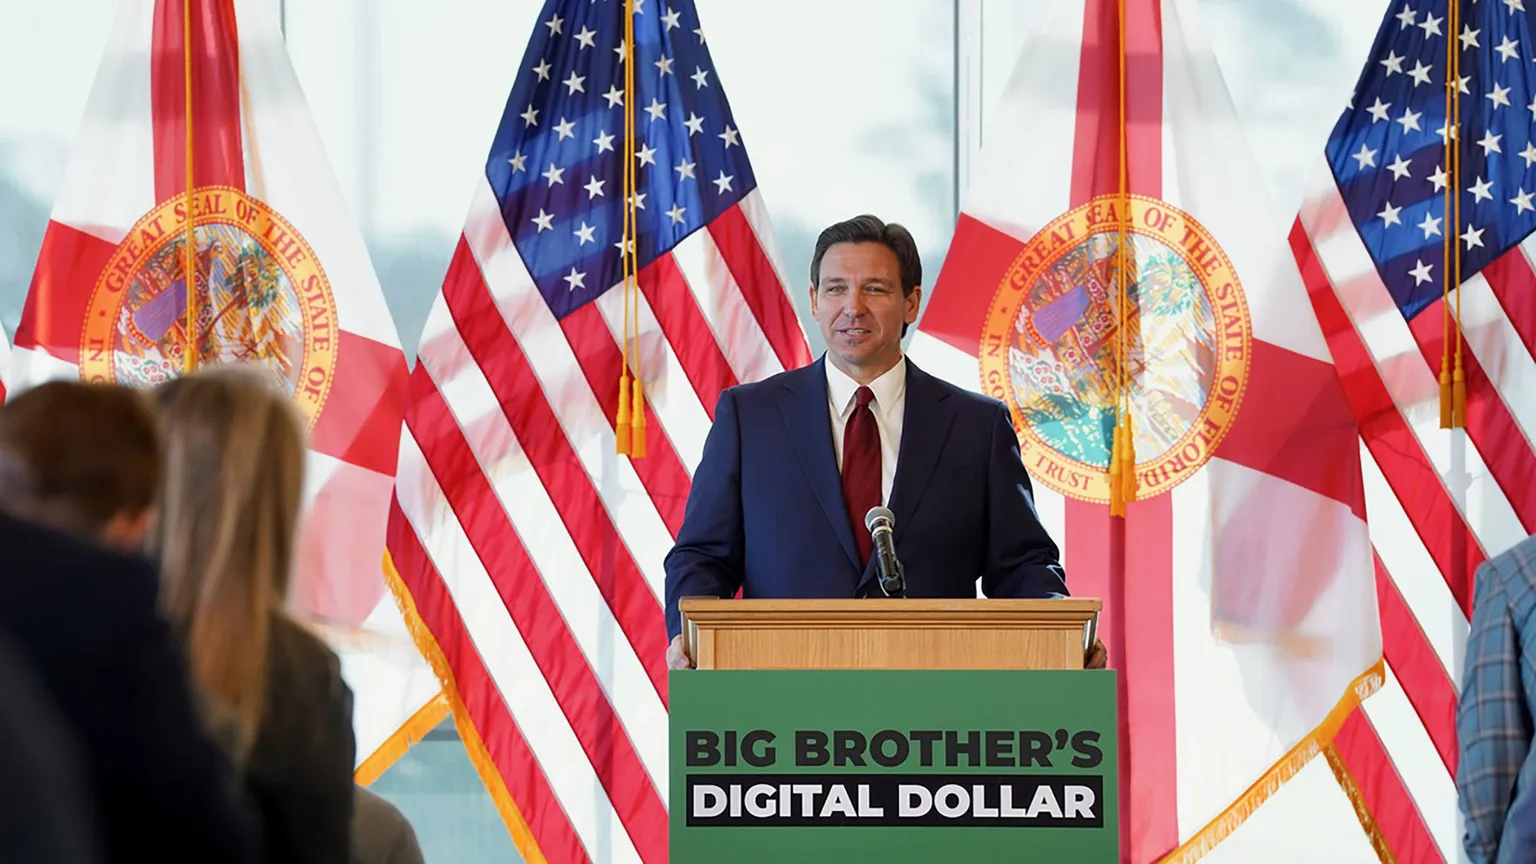 Image: Office of Governor Ron DeSantis